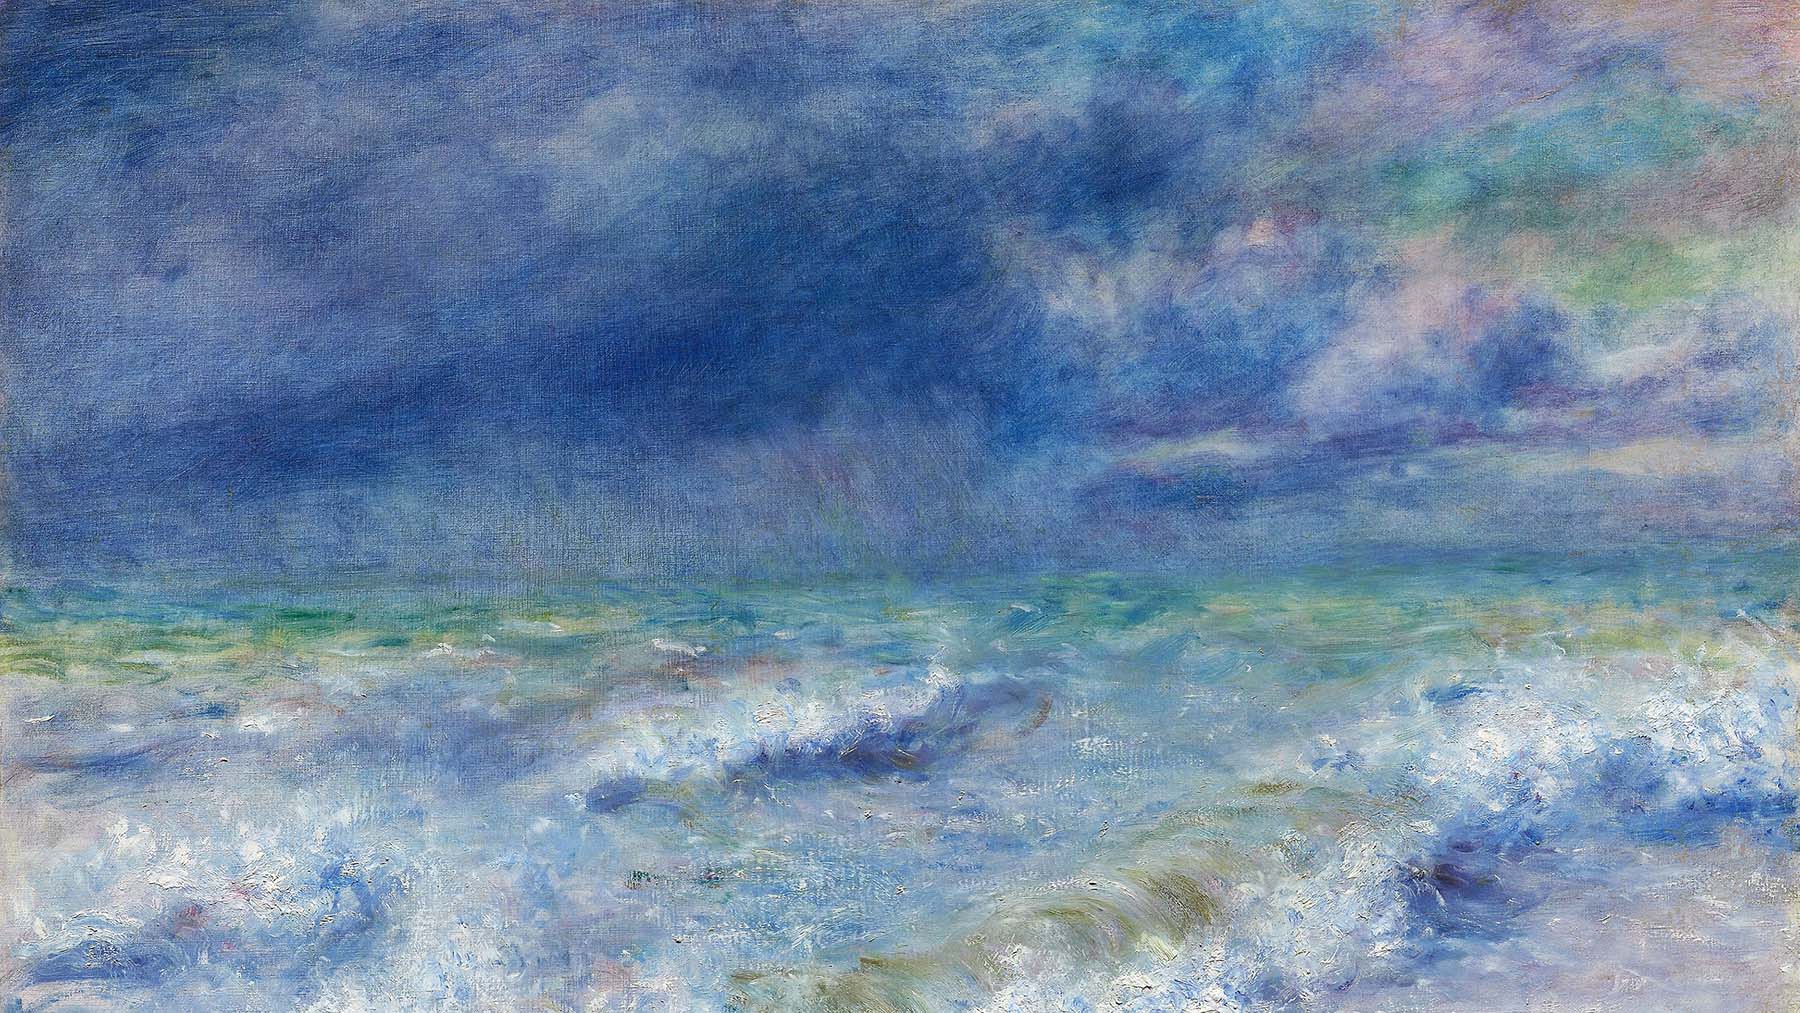 Cropped version of the impressionist painting Seascape (1897) by Pierre-Auguste Renoir (Original from The Art Institute of Chicago. Courtesy of RawPixel)